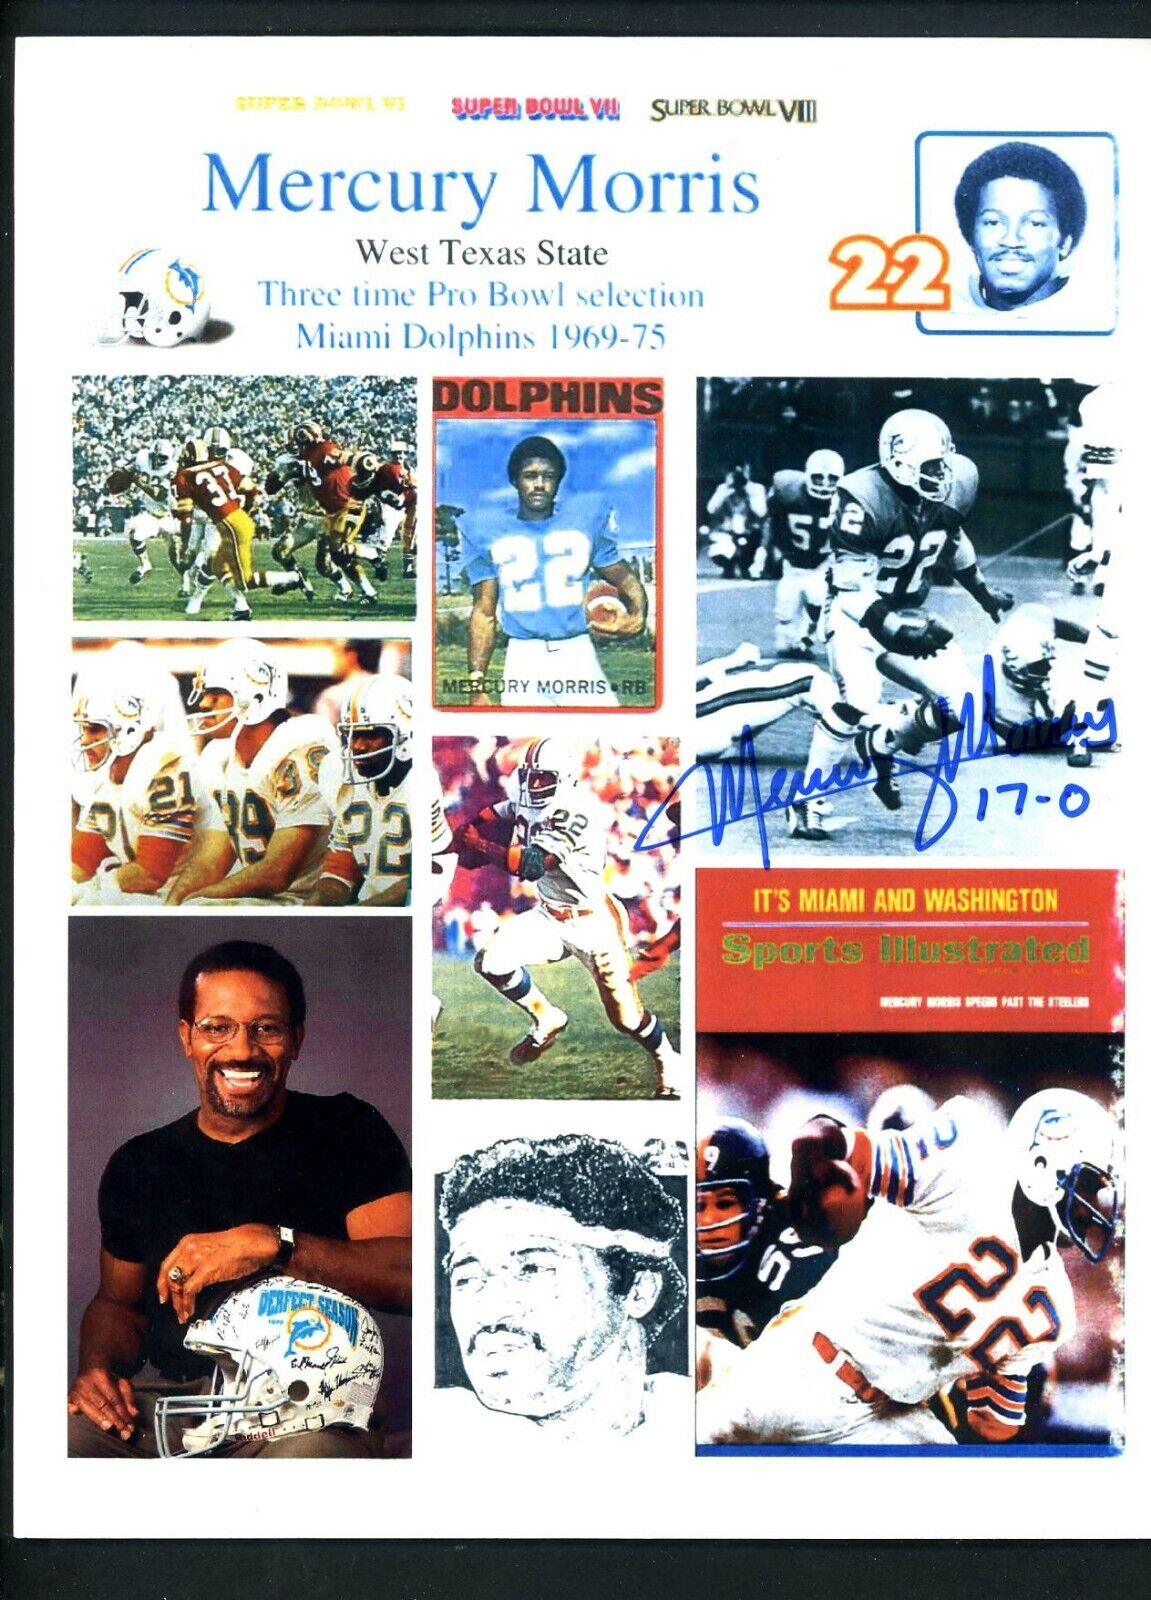 Mercury Morris Signed Autographed 8x11 Photo Poster painting Collage JSA Authent Miami Dolphins